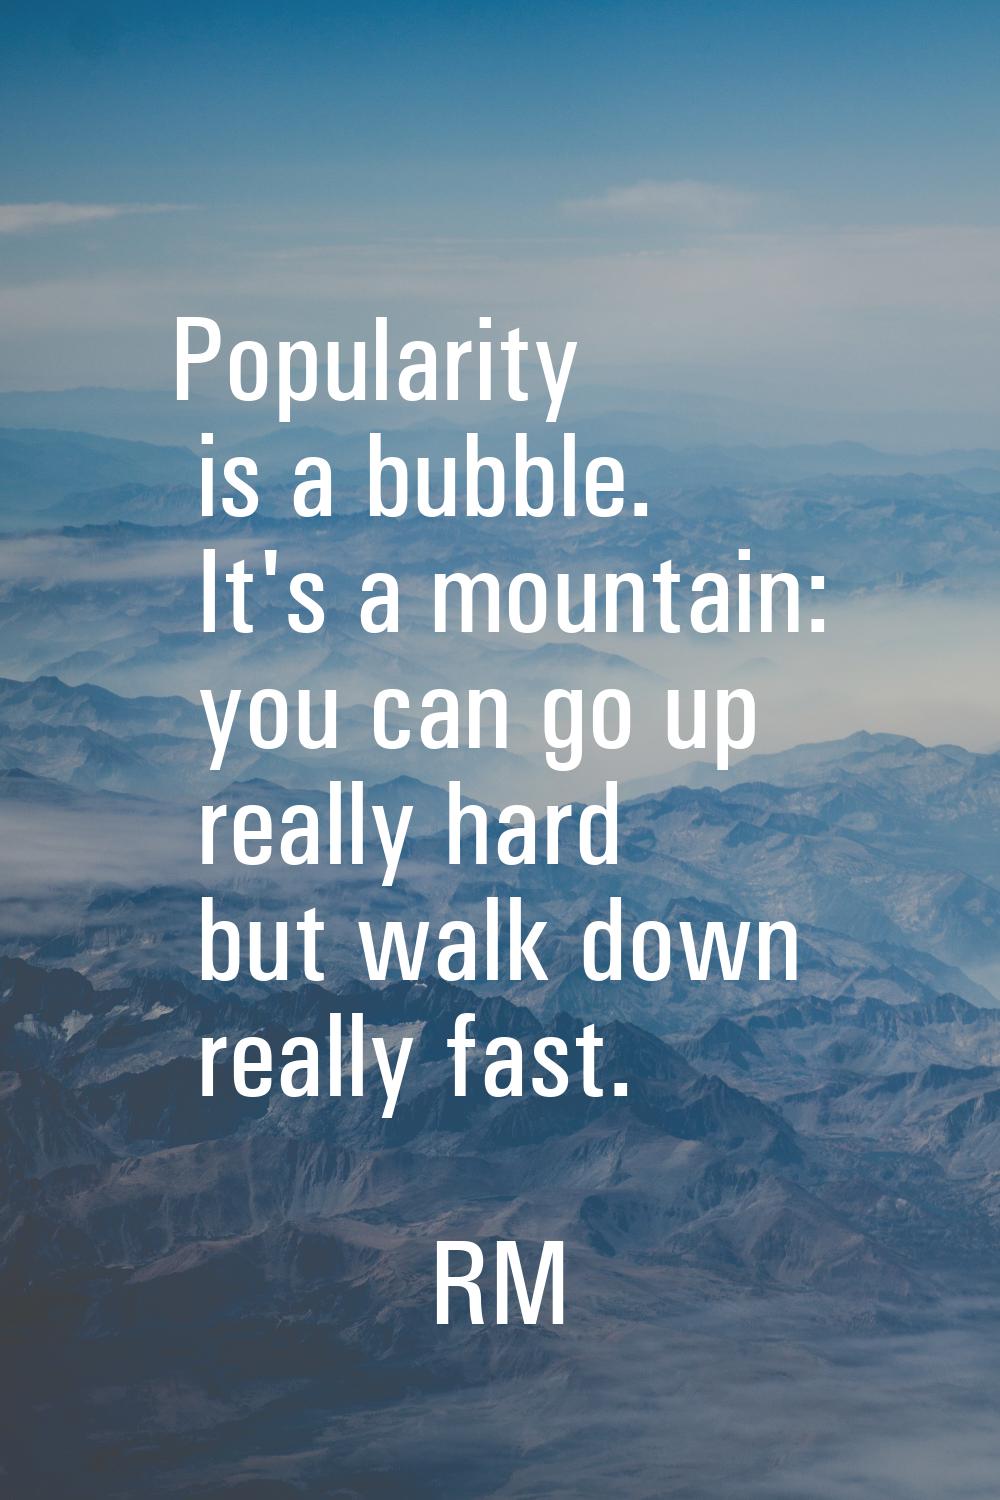 Popularity is a bubble. It's a mountain: you can go up really hard but walk down really fast.